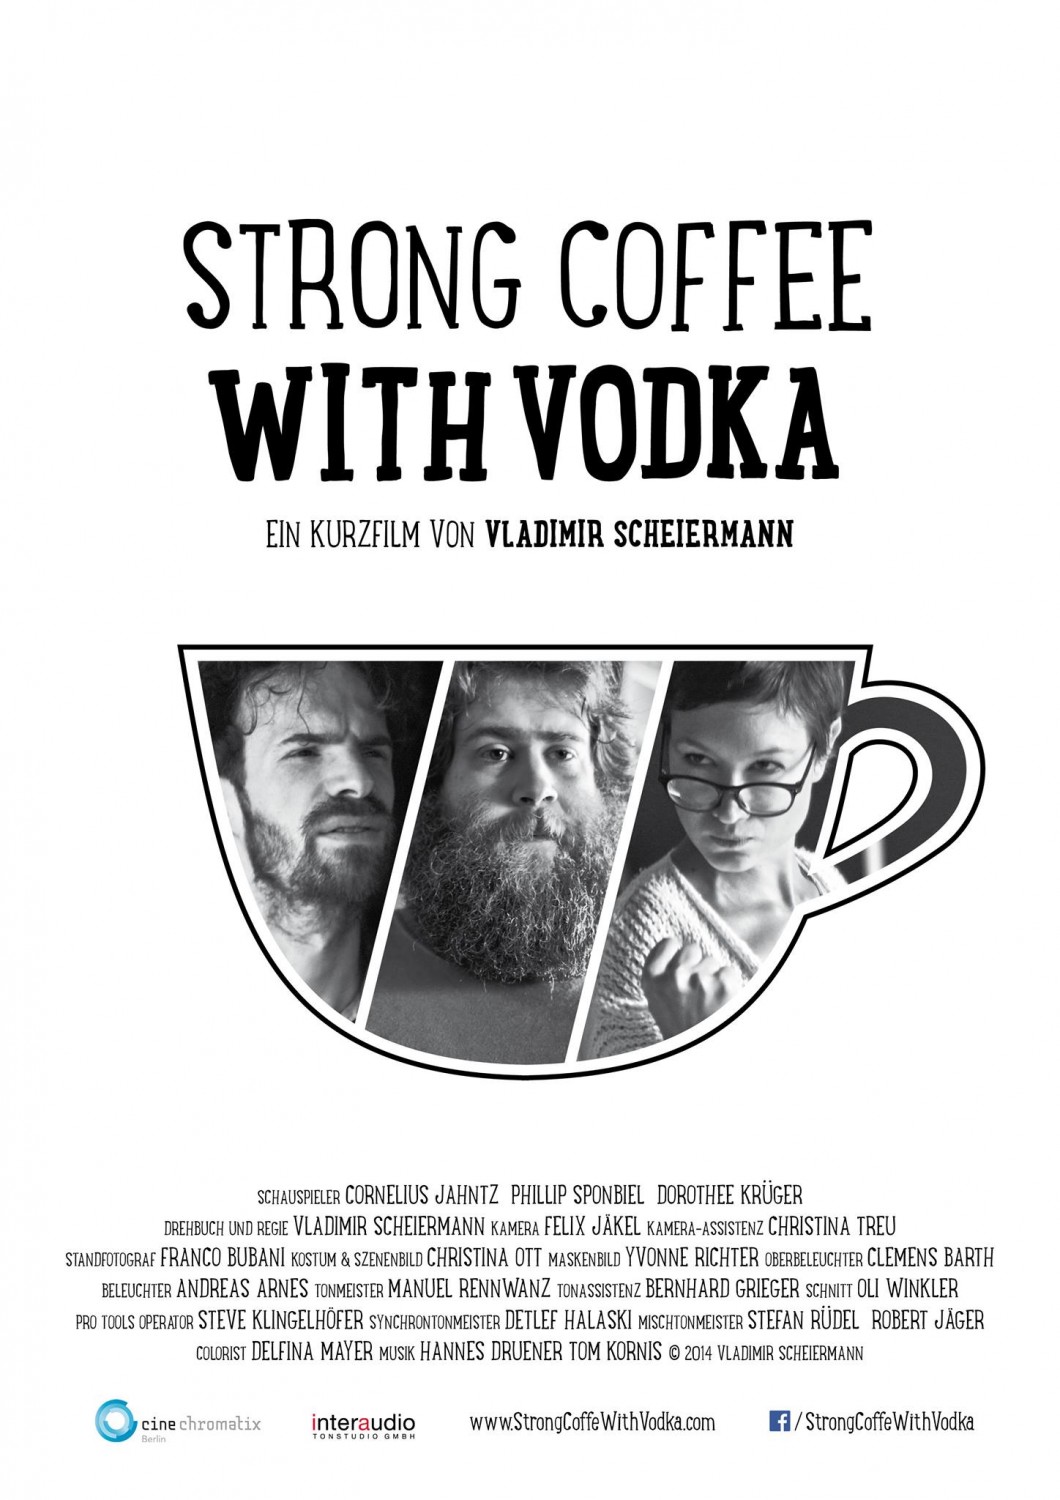 Extra Large Movie Poster Image for Strong Coffee with Vodka